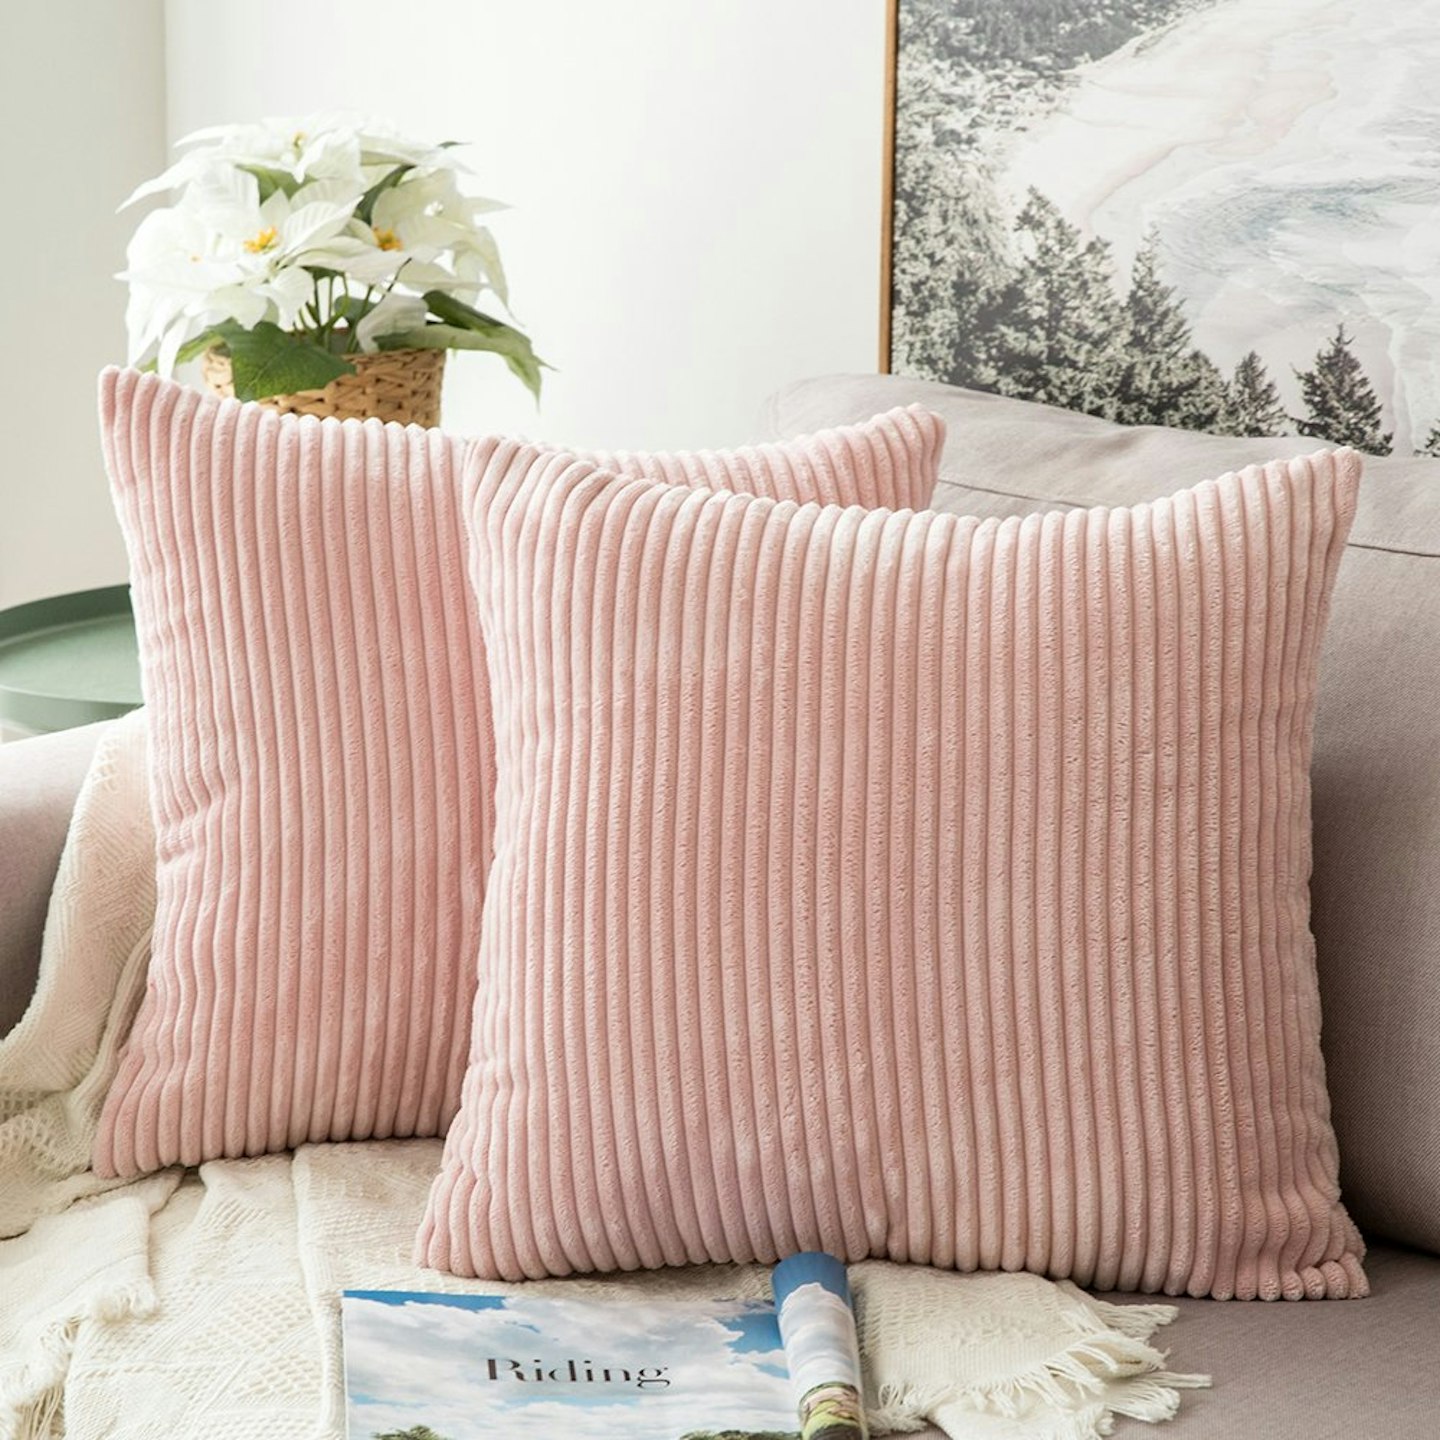 MIULEE Corduroy Square Cushion, £12.99 for two